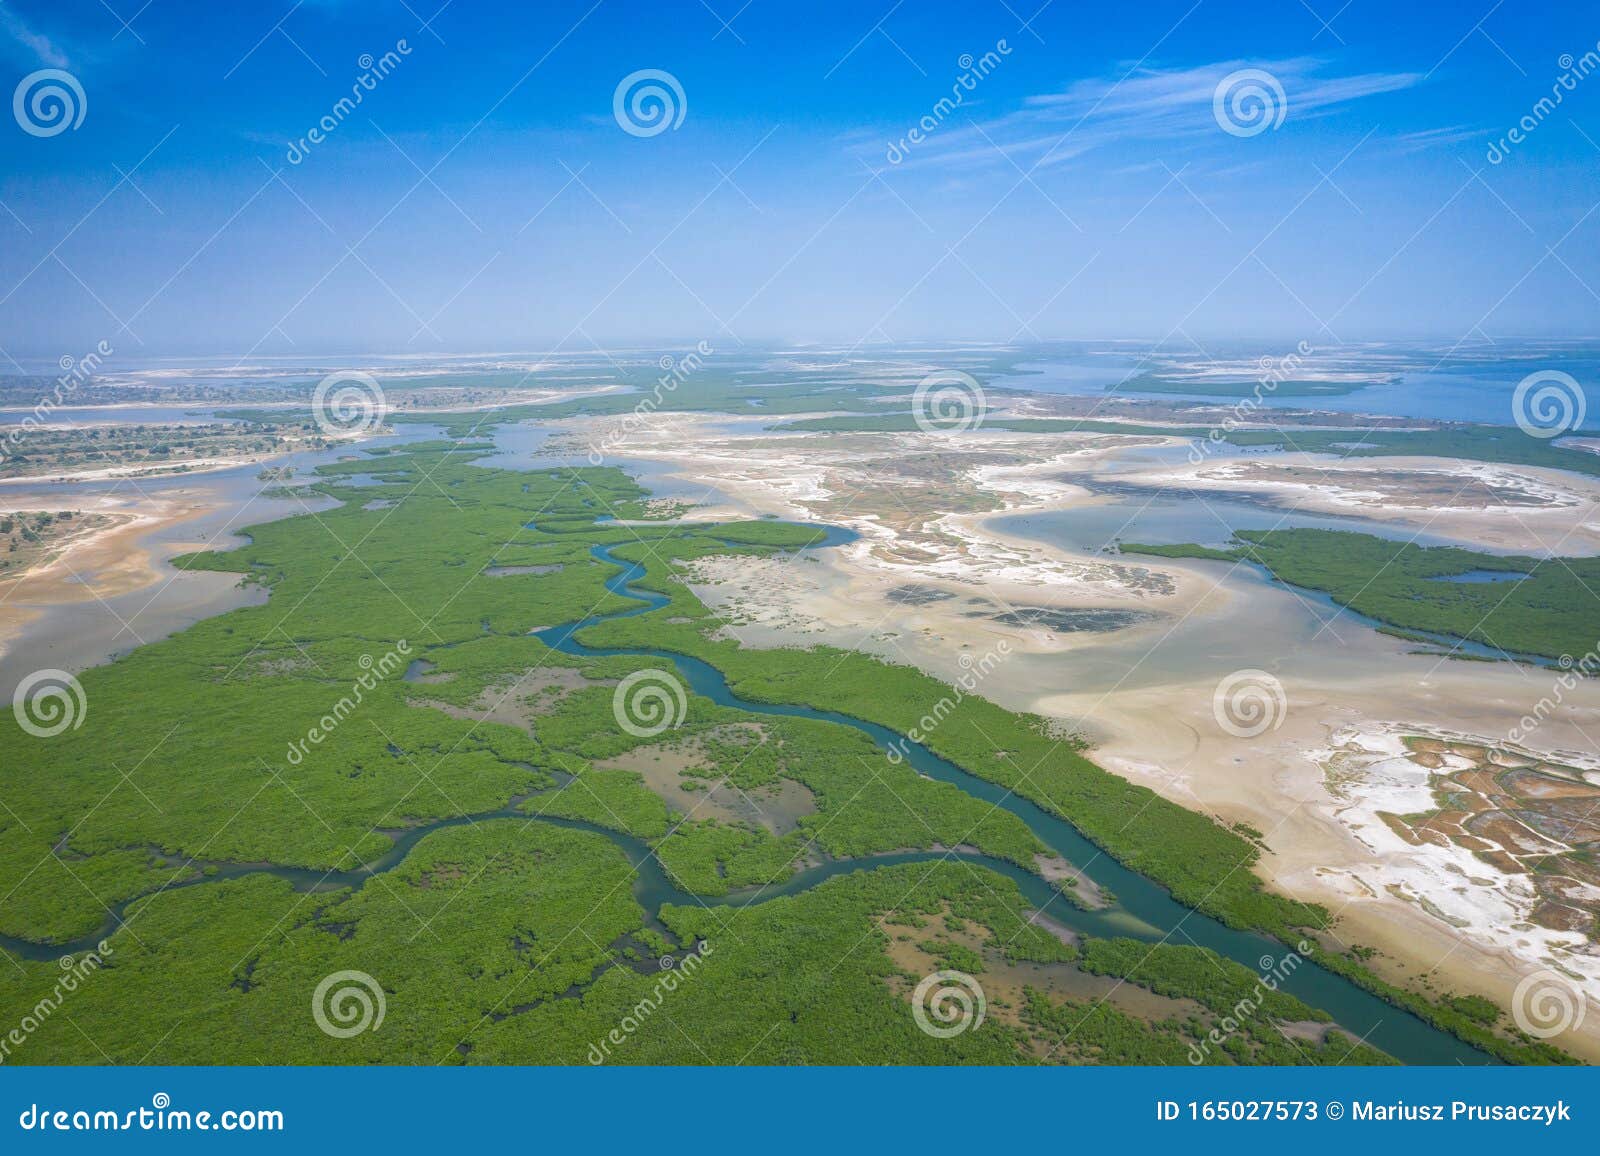 senegal mangroves. aerial view of mangrove forest in the  saloum delta national park, joal fadiout, senegal. photo made by drone